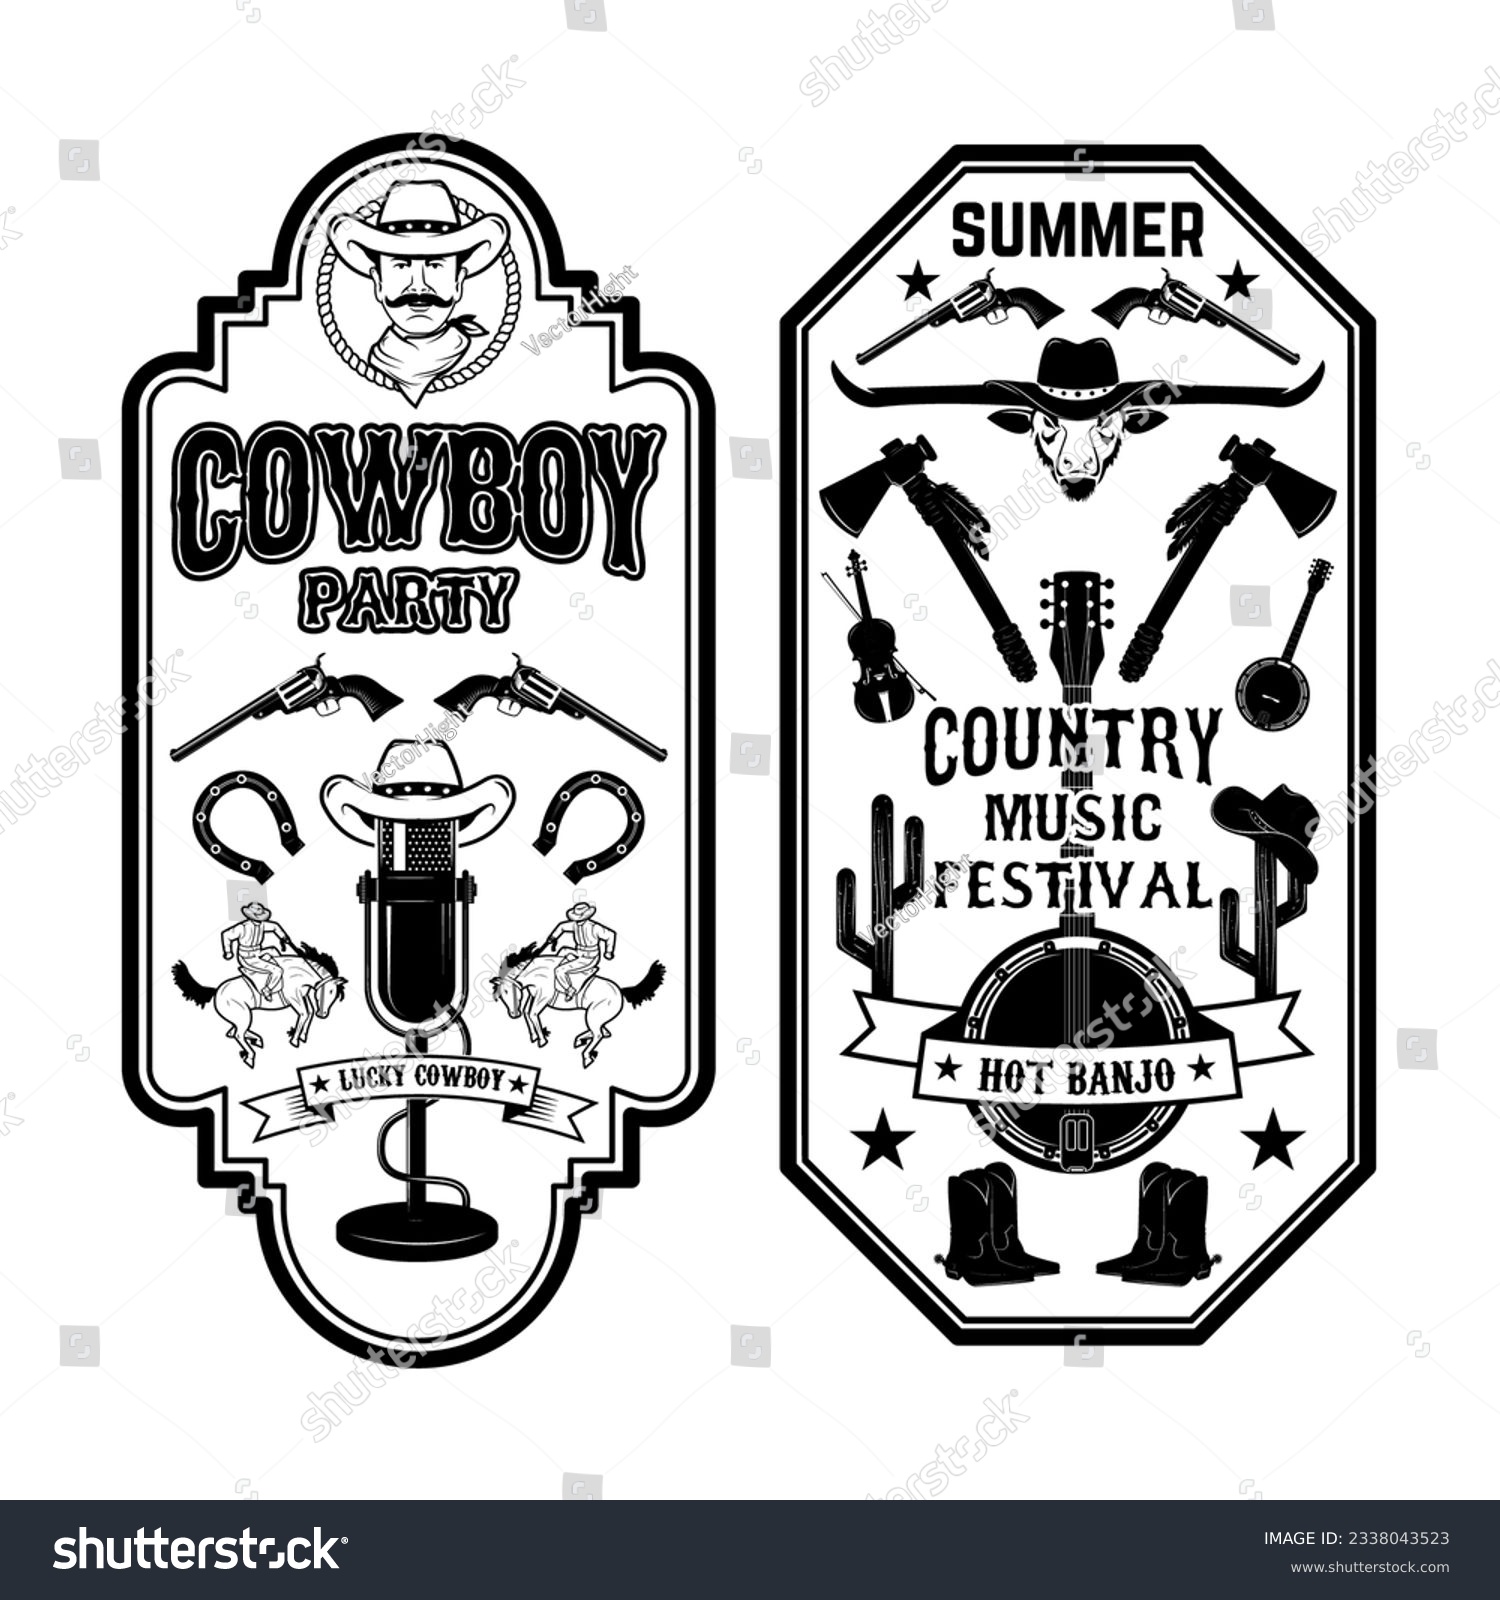 SVG of Folk rock party. Summer country music festival flyer template. Cowboys, banjo, old style microphone. Vector illustration. svg